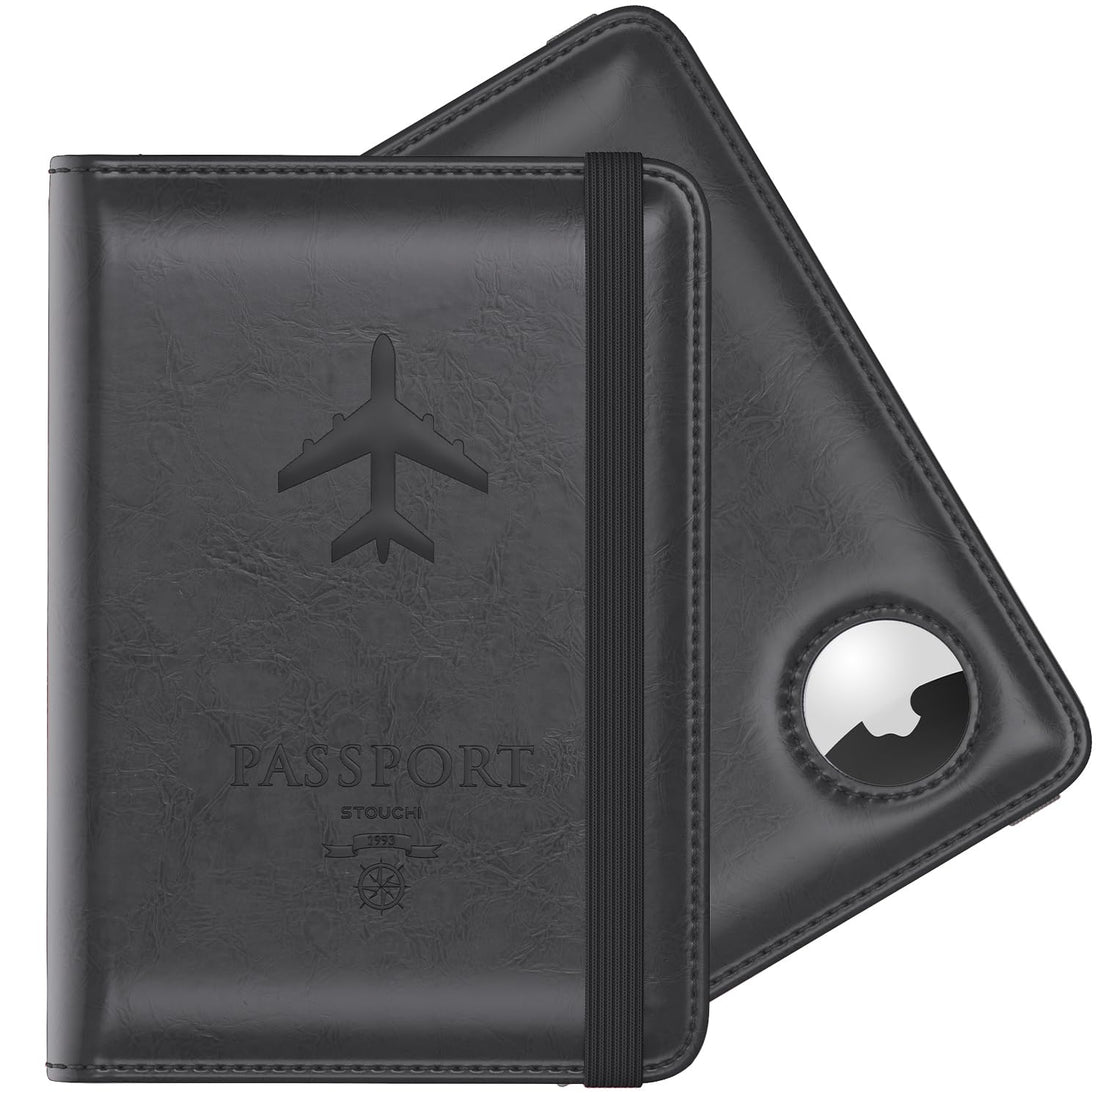 Stouchi AirTag Passport Holder, Passport Holder with Airtag Slot, Passport Wallet Cover for Men, Family Leather Passport Protector Case, Anti-Lost Travel Essentials, Grey